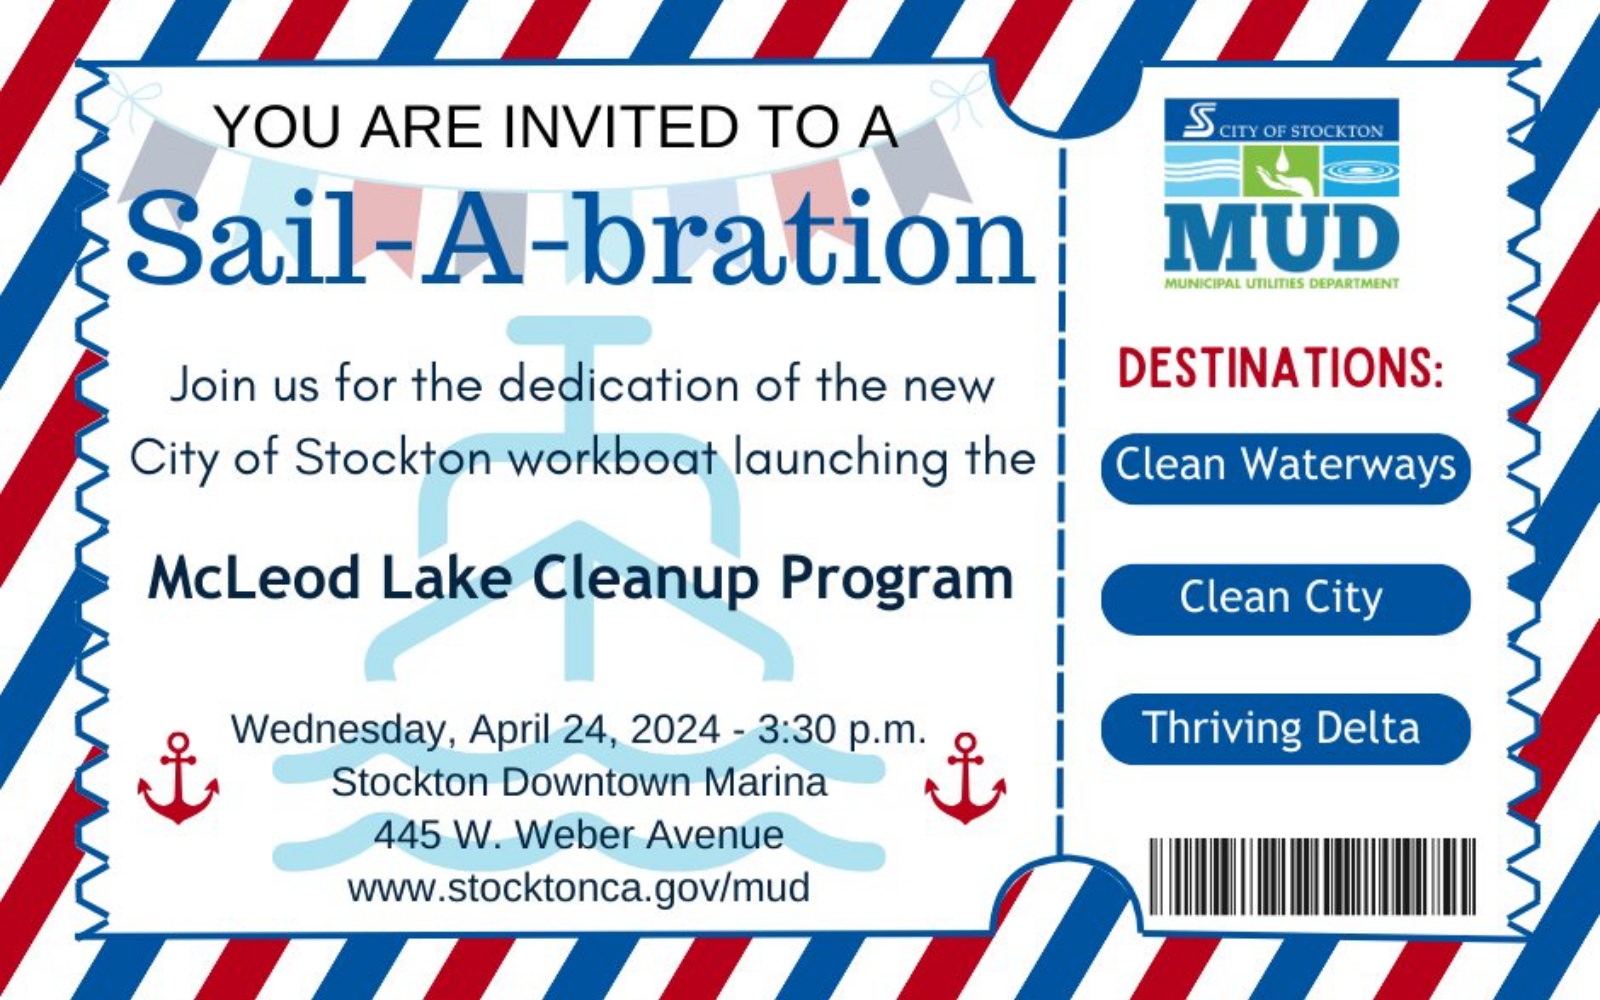 City of Stockton Downtown Waterfront Workboat Dedication Ceremony on April 24